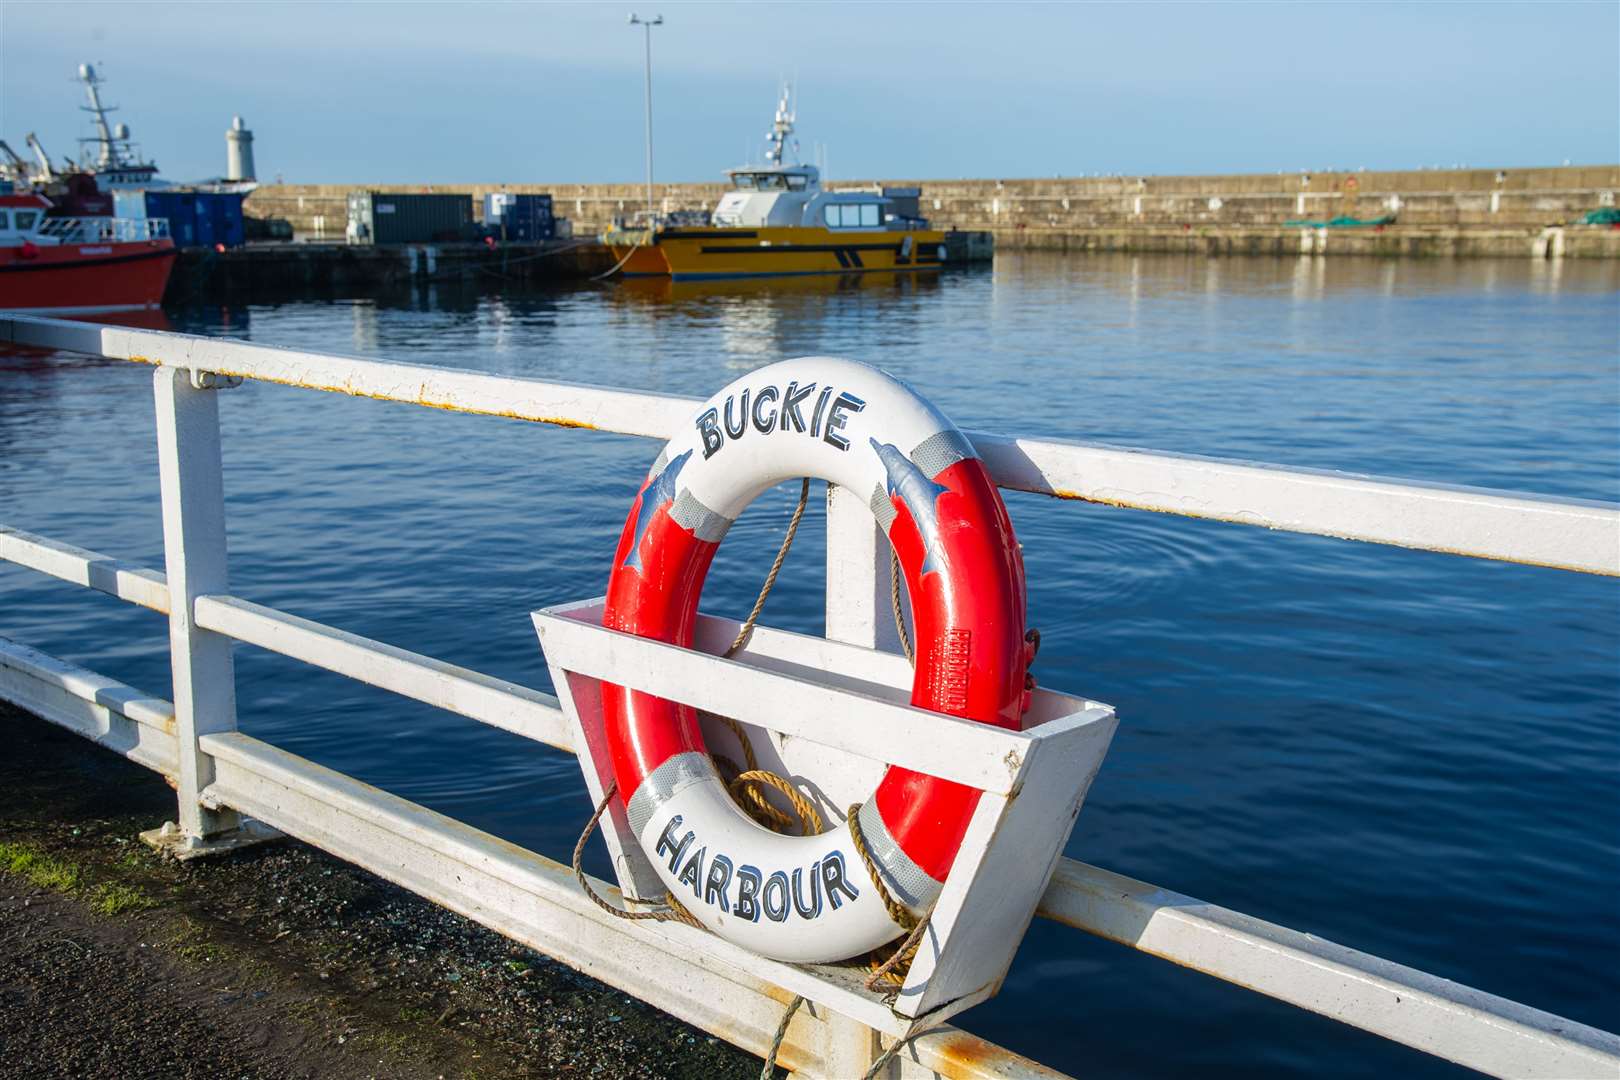 Fish landings at Buckie Harbour were well down on the previous week. Picture: Daniel Forsyth